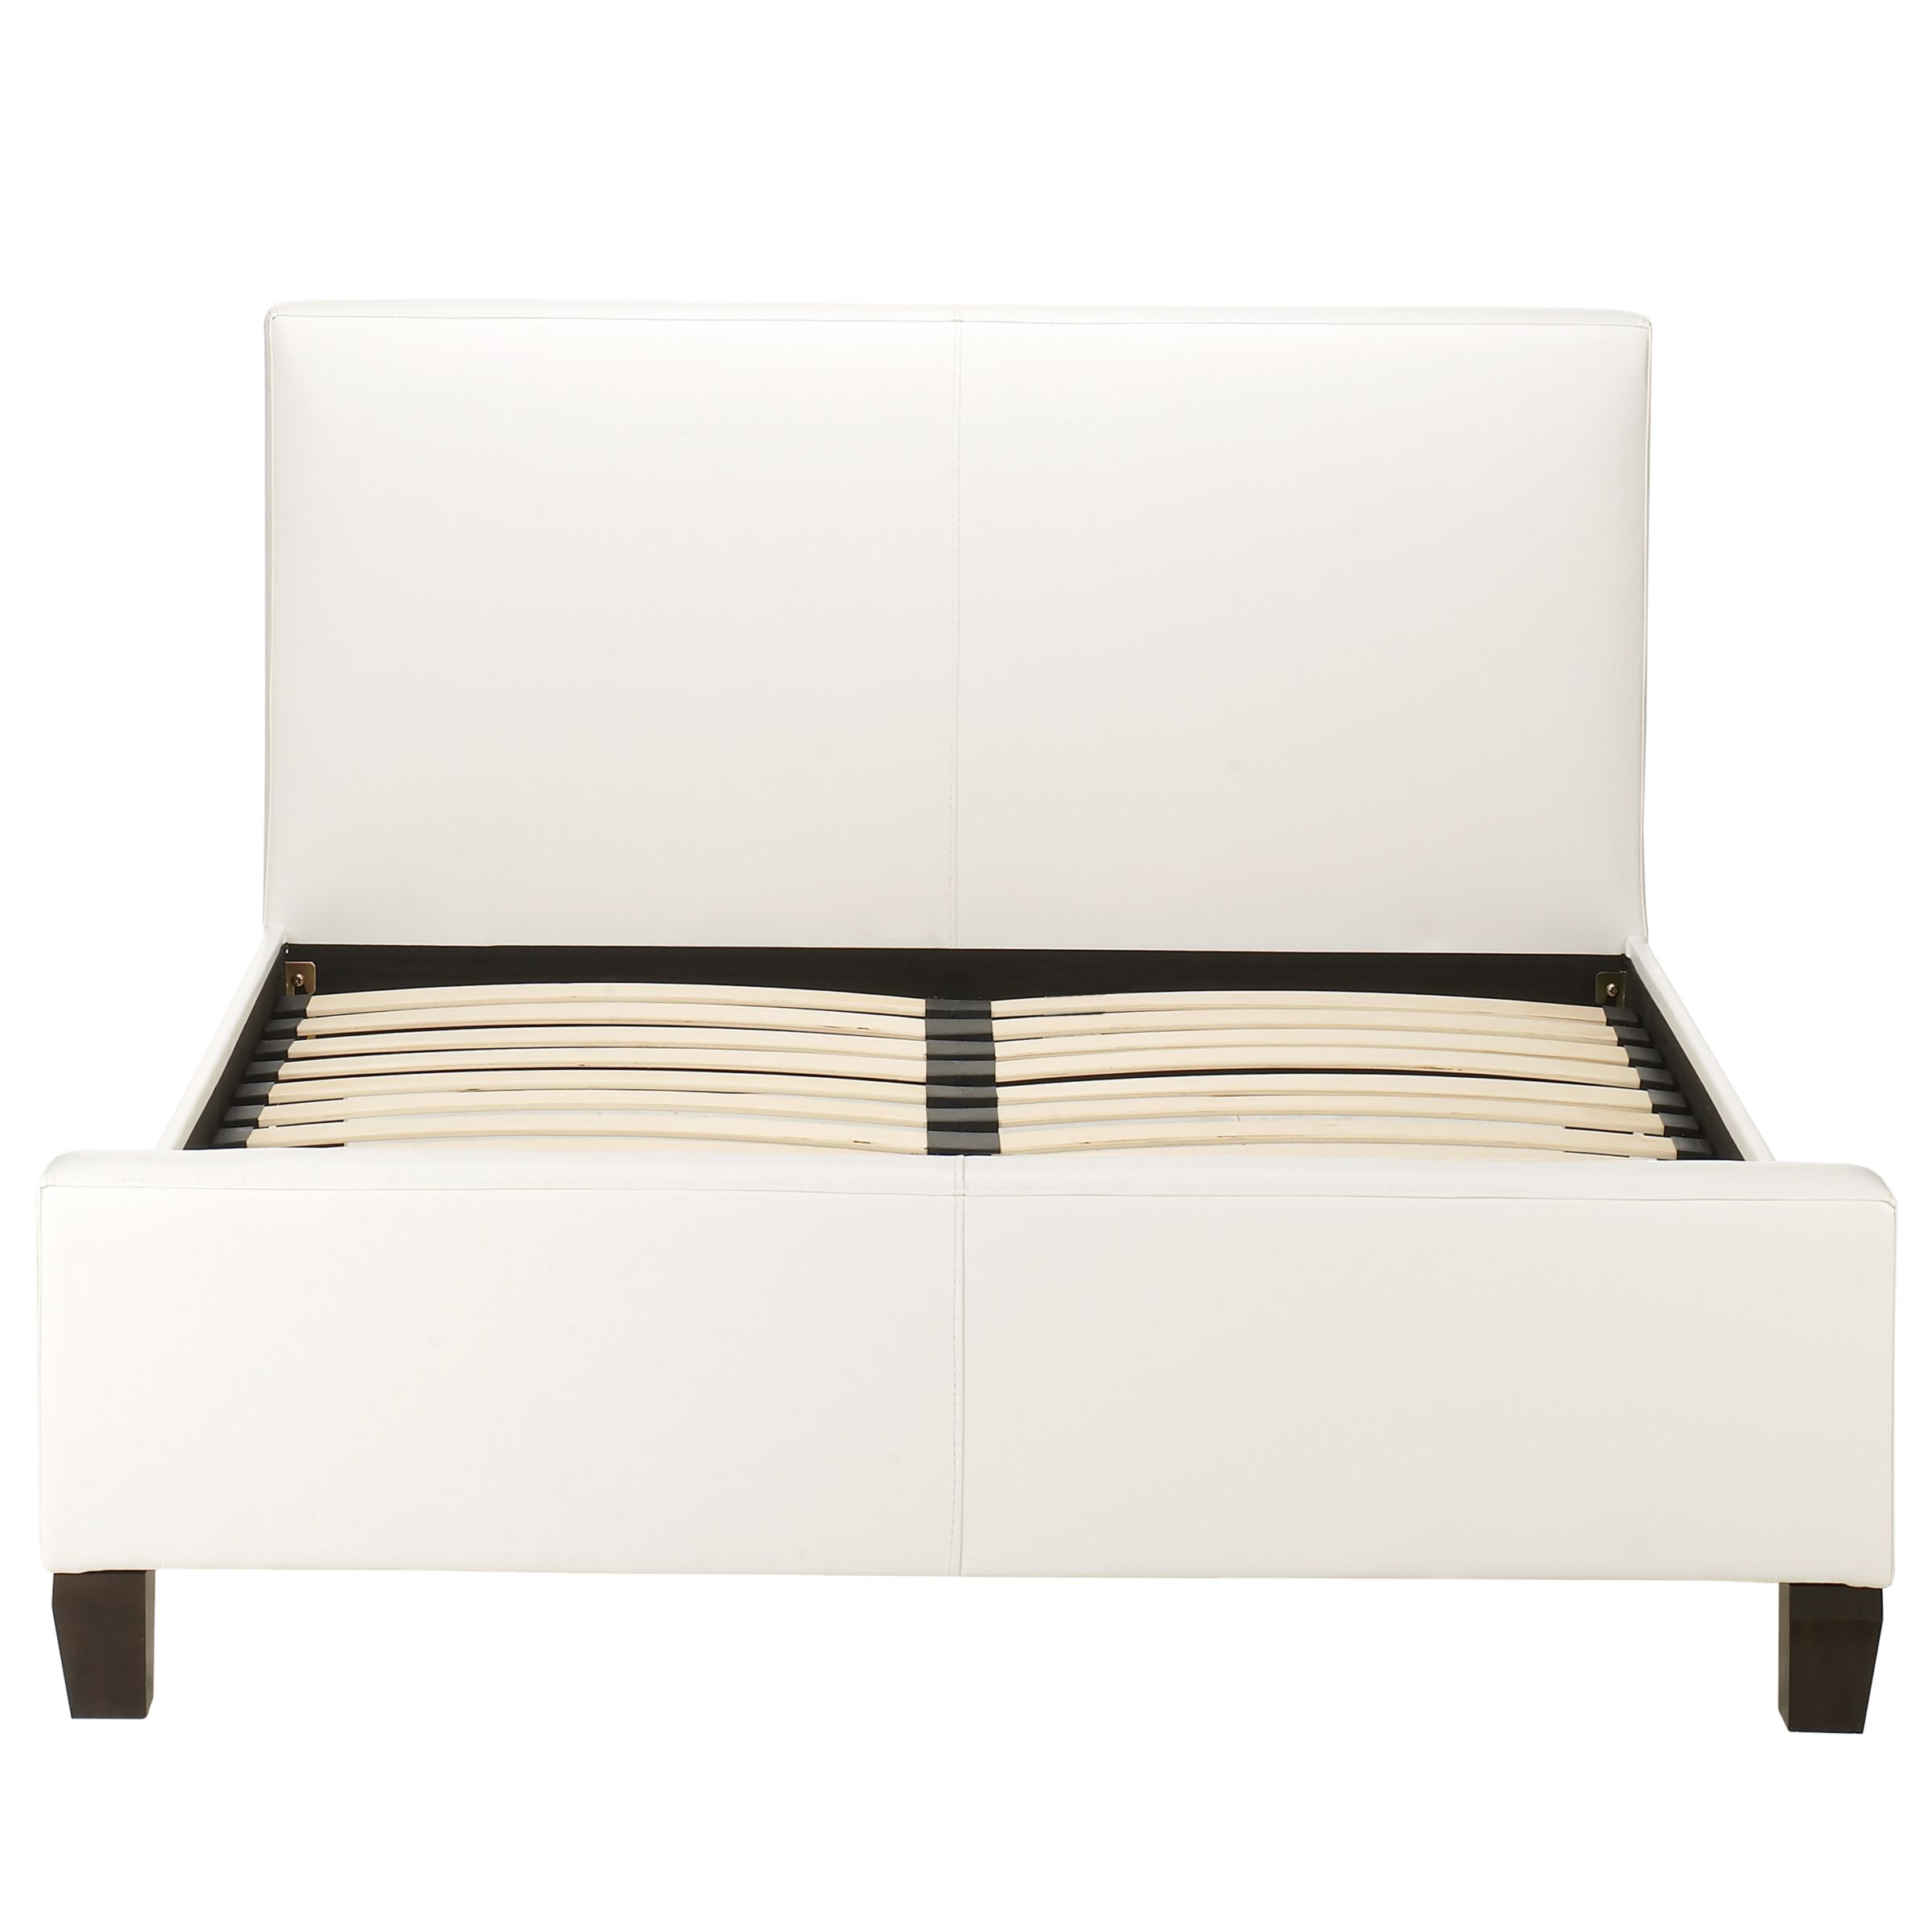 Calabria Vinyl Bedstead, White, Double at John Lewis